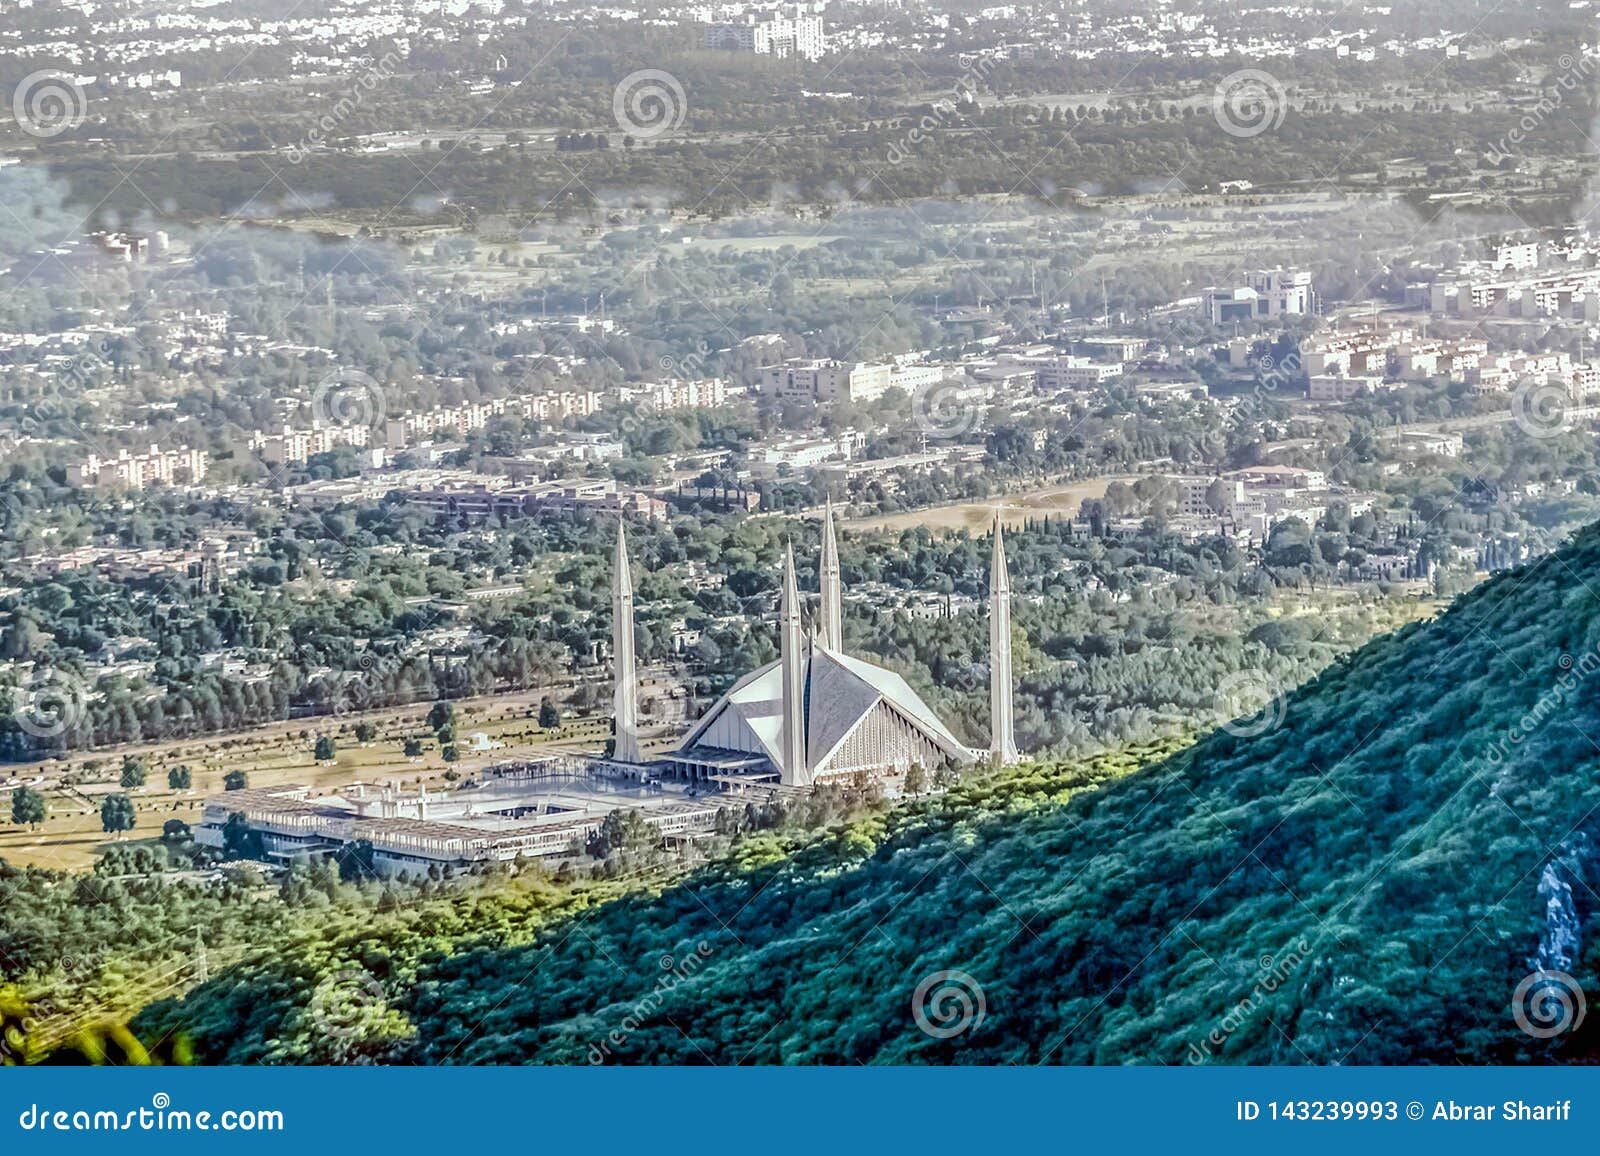 shah faisal mosque is the masjid in islamabad, pakistan. located on the foothills of margalla hills. the largest mosque  of